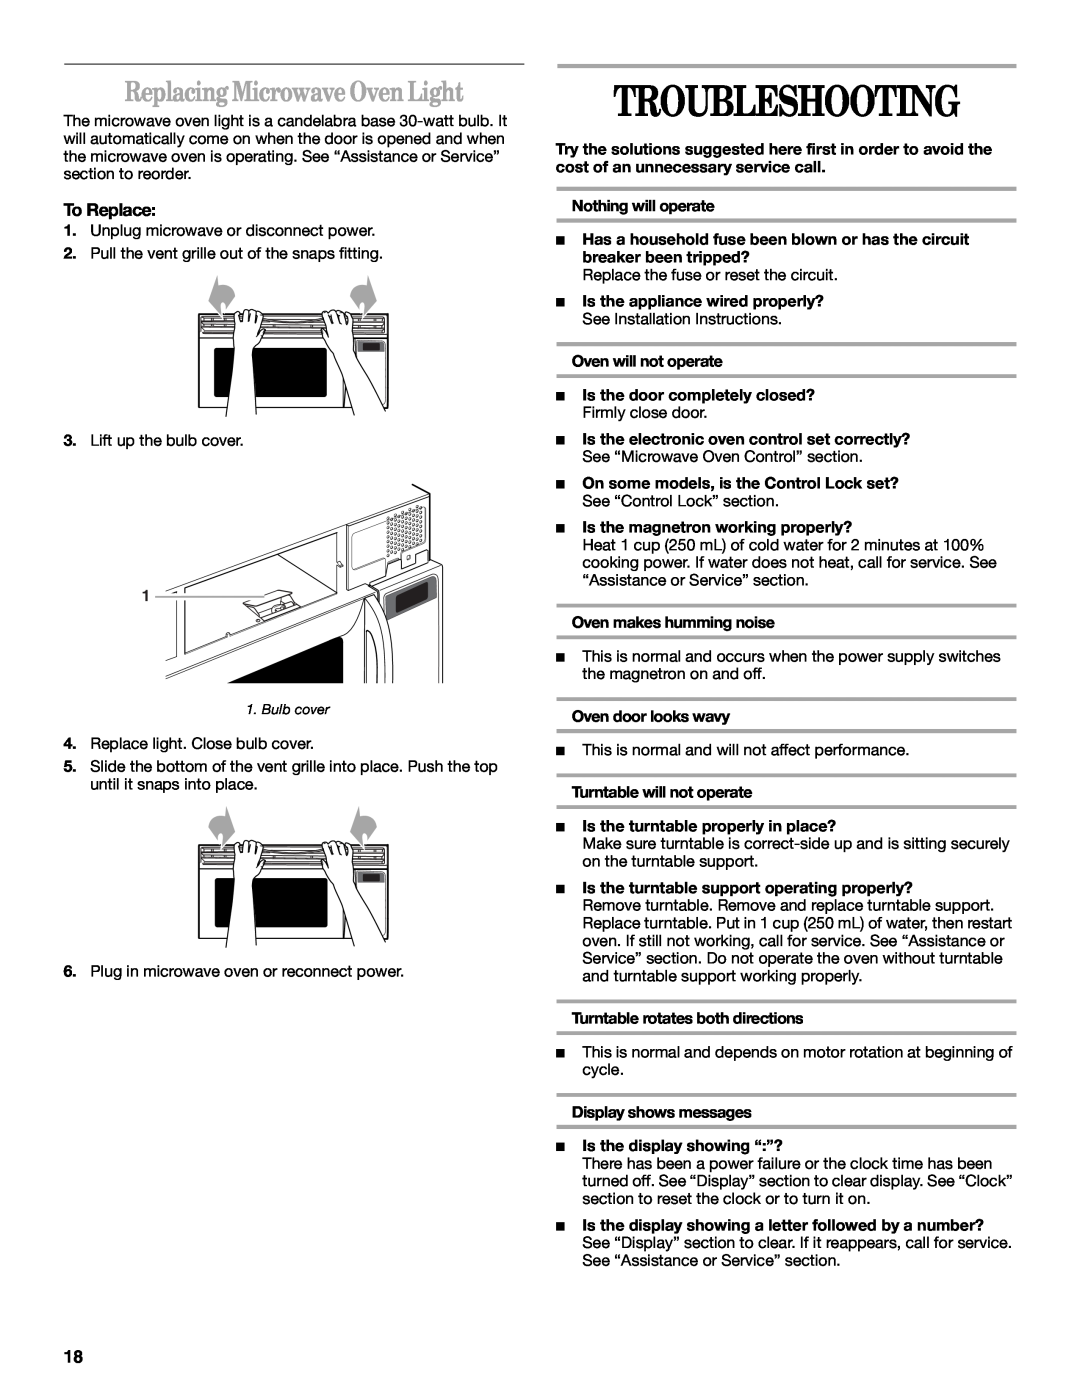 Whirlpool GH9185XL manual Troubleshooting, Replacing Microwave Oven Light 